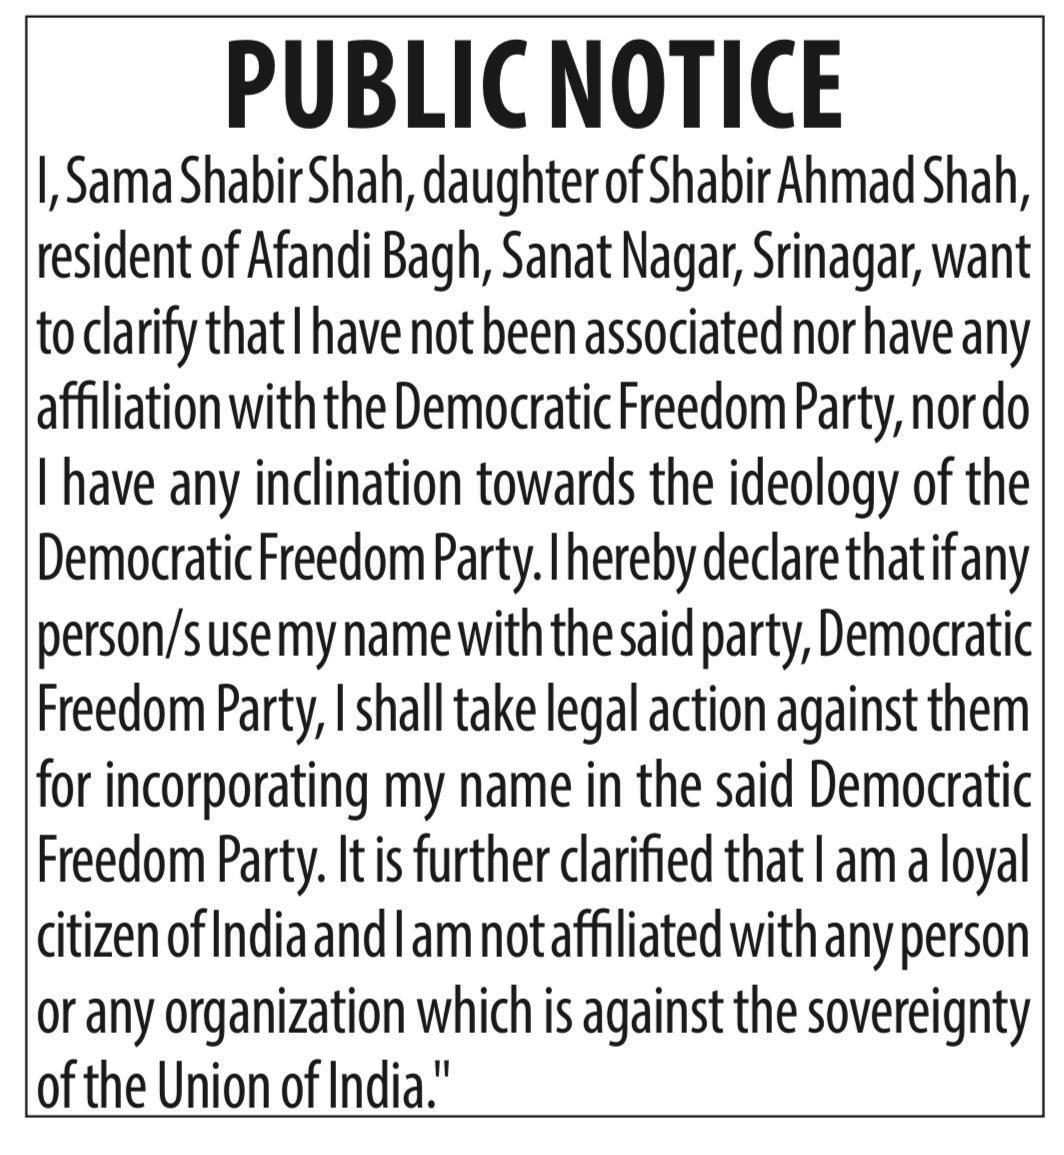 Jailed separatist Shabir Shah’s daughter Sama Shabir has dissociated herself from the separatist ideology and her fathers banned the organisation “Democratic Freedom Party” She pledged her loyalty to the sovereignty of the Union of India. PS; Mera Kashmir Badal Raha Hai.